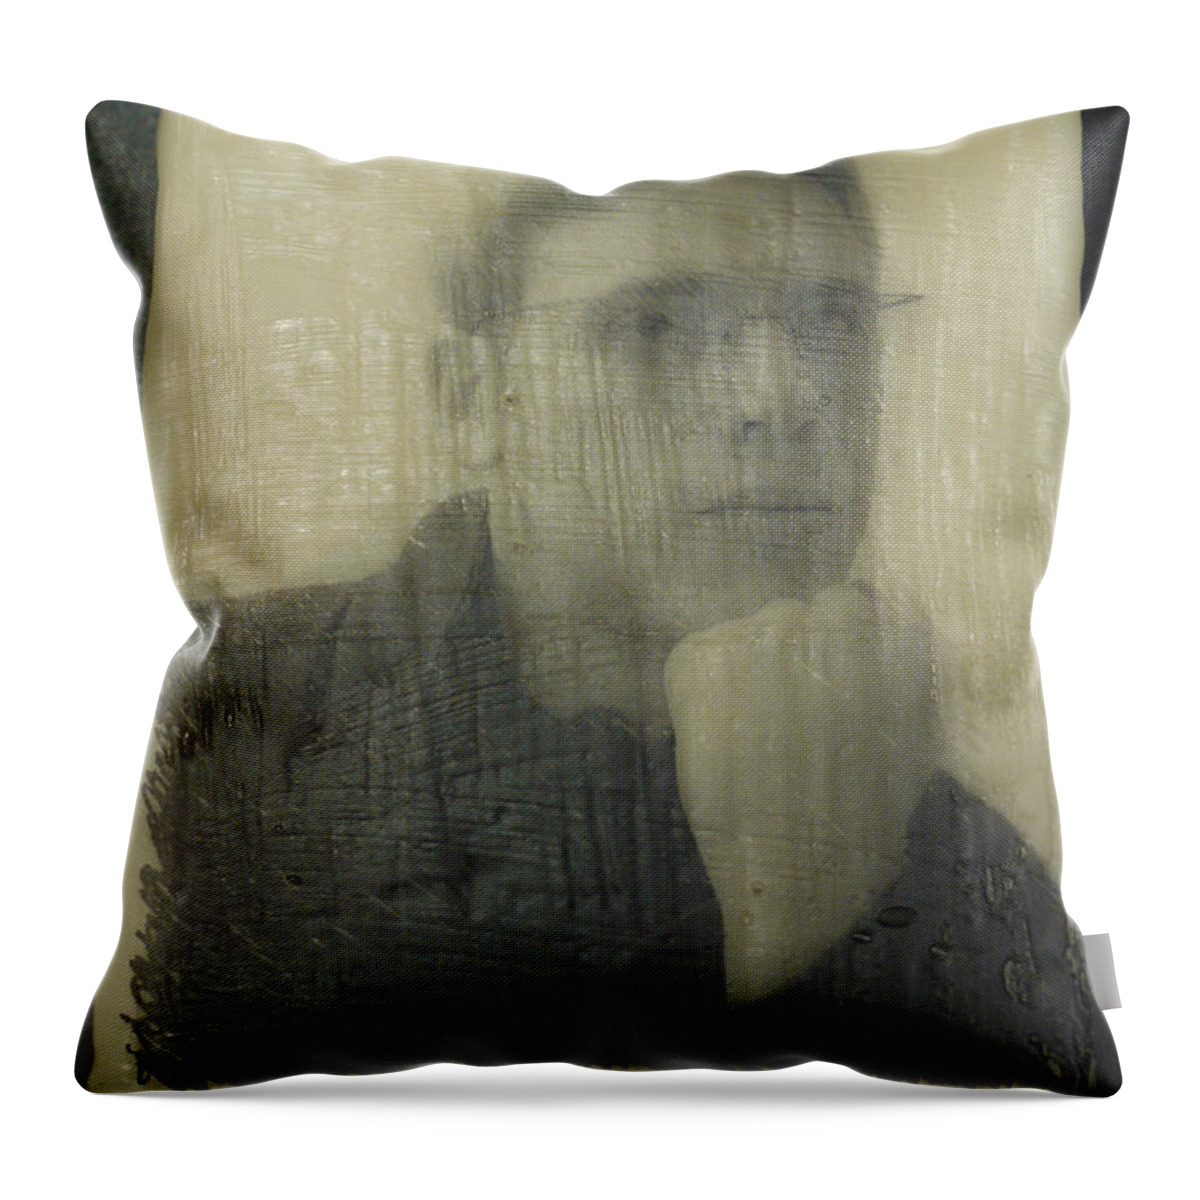 Encaustic Throw Pillow featuring the painting Lawson by Heather Hennick